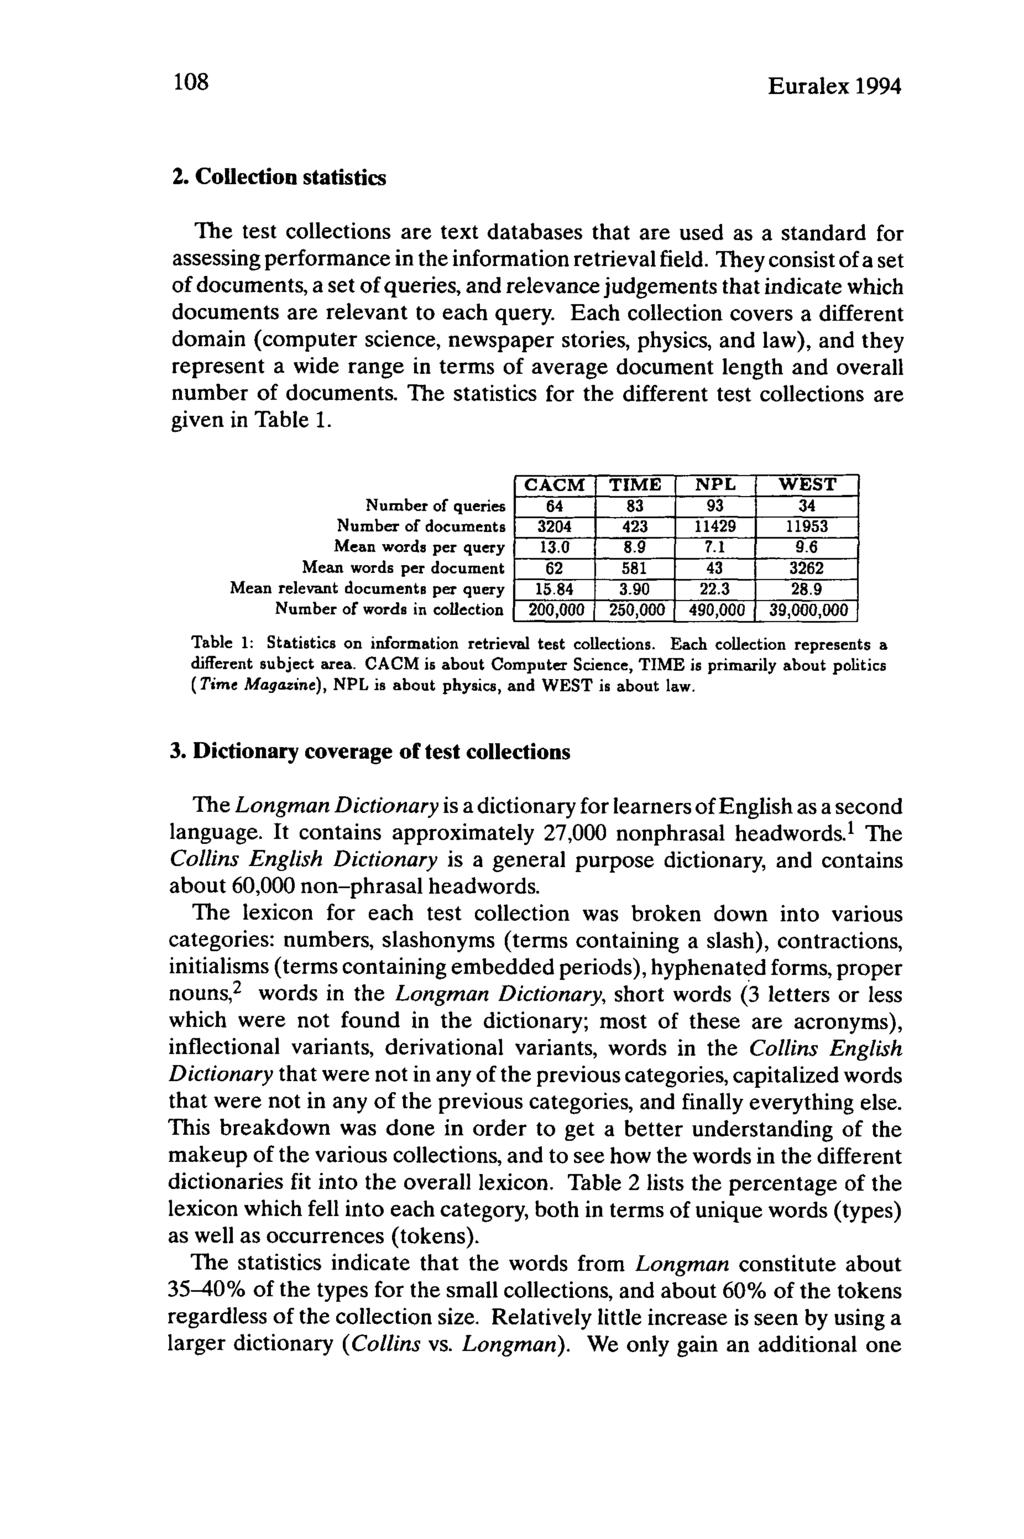 108 Euralex 1994 2. Collection statistics The test collections are text databases that are used as a standard for assessing performance in the information retrieval field.